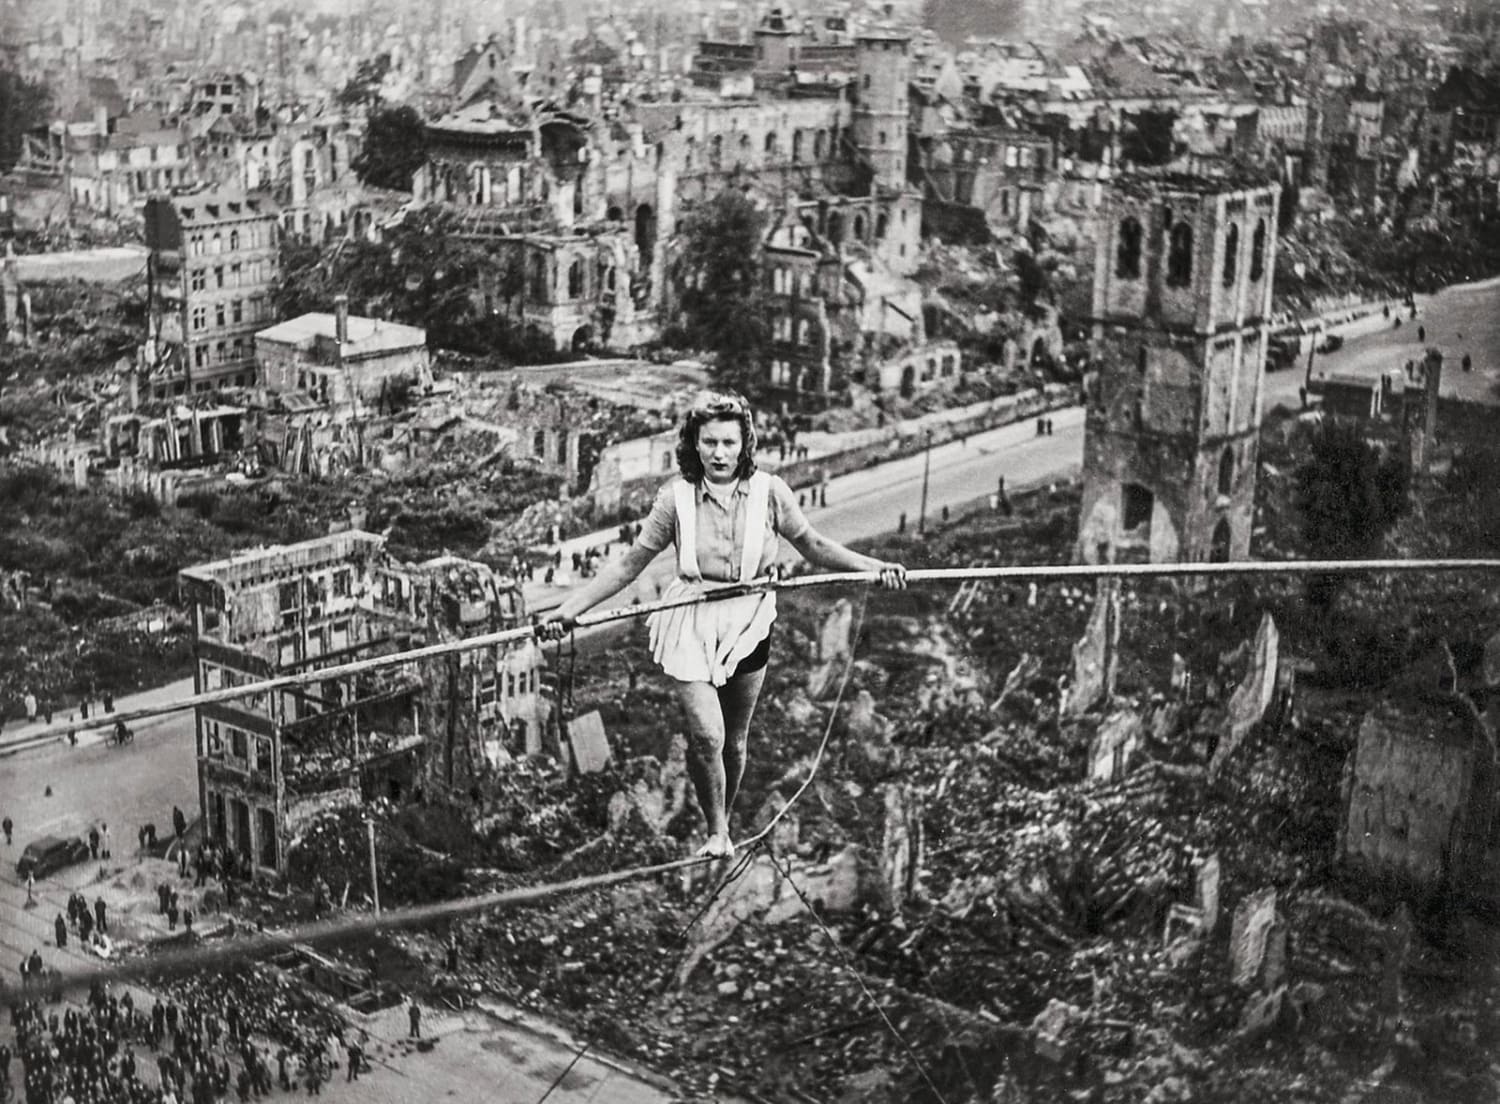 Margret Zimmermann on a tightrope over the ruins of Cologne, Germany, 1946.